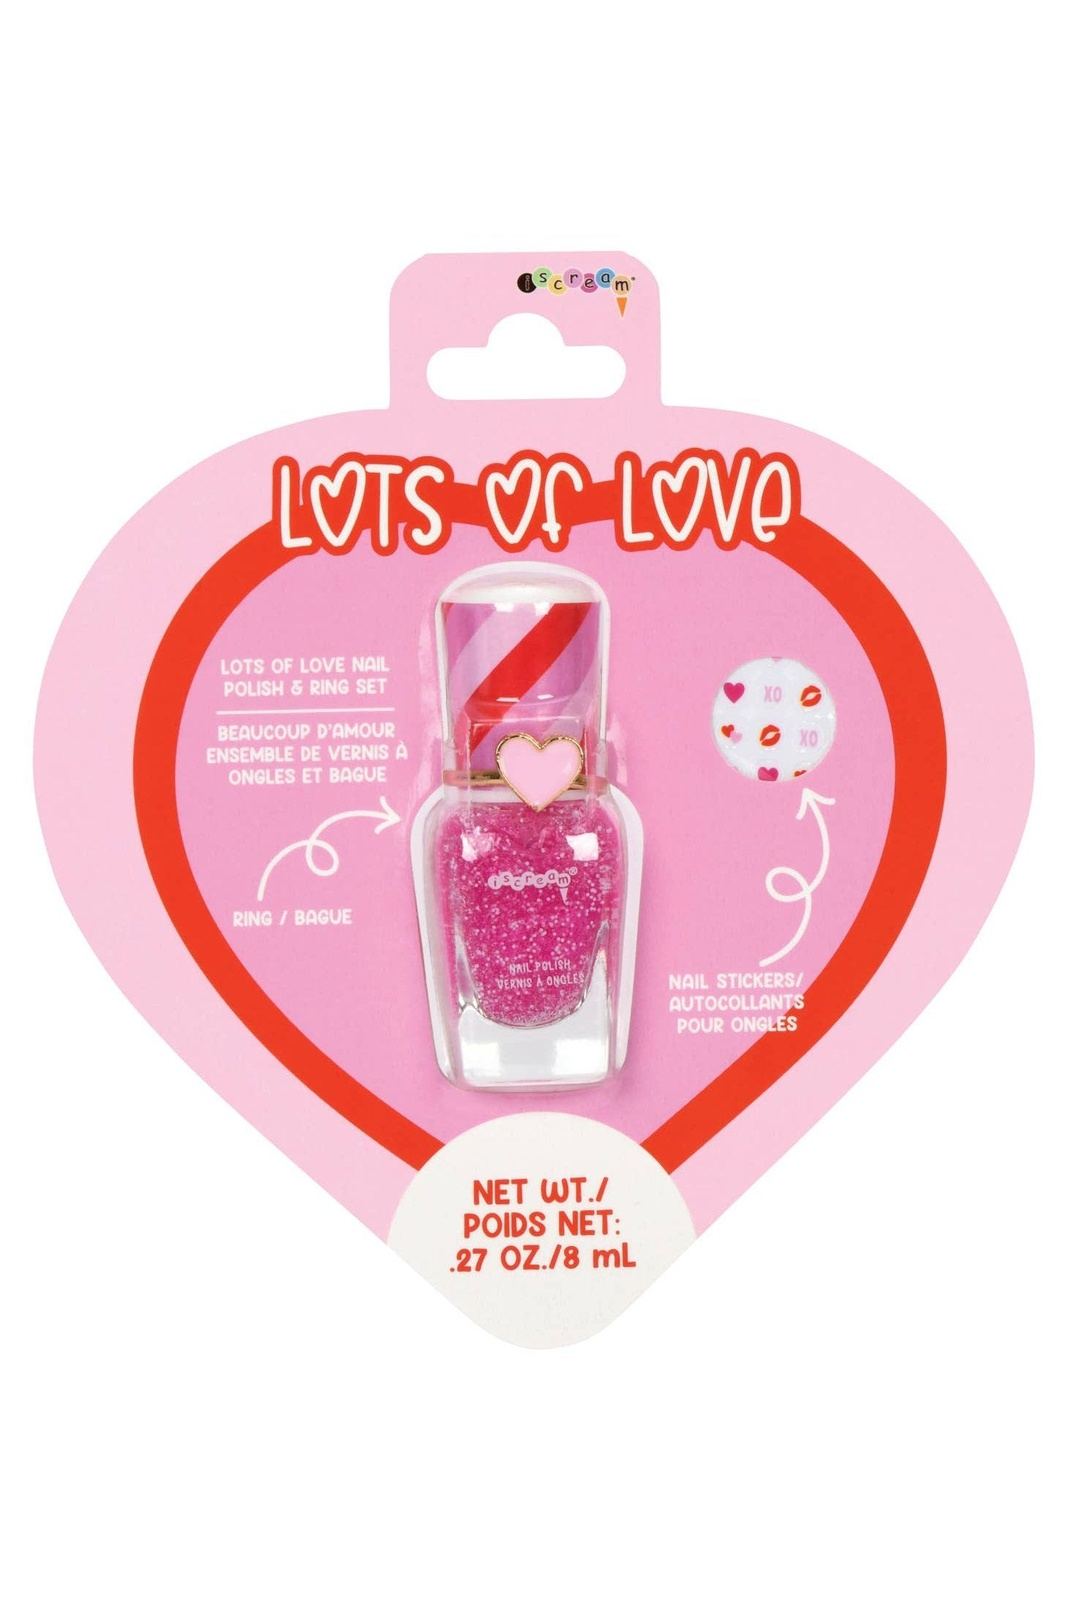 Lots Of Love Nail Polish & Ring Set Tea for Three: A Children's Boutique